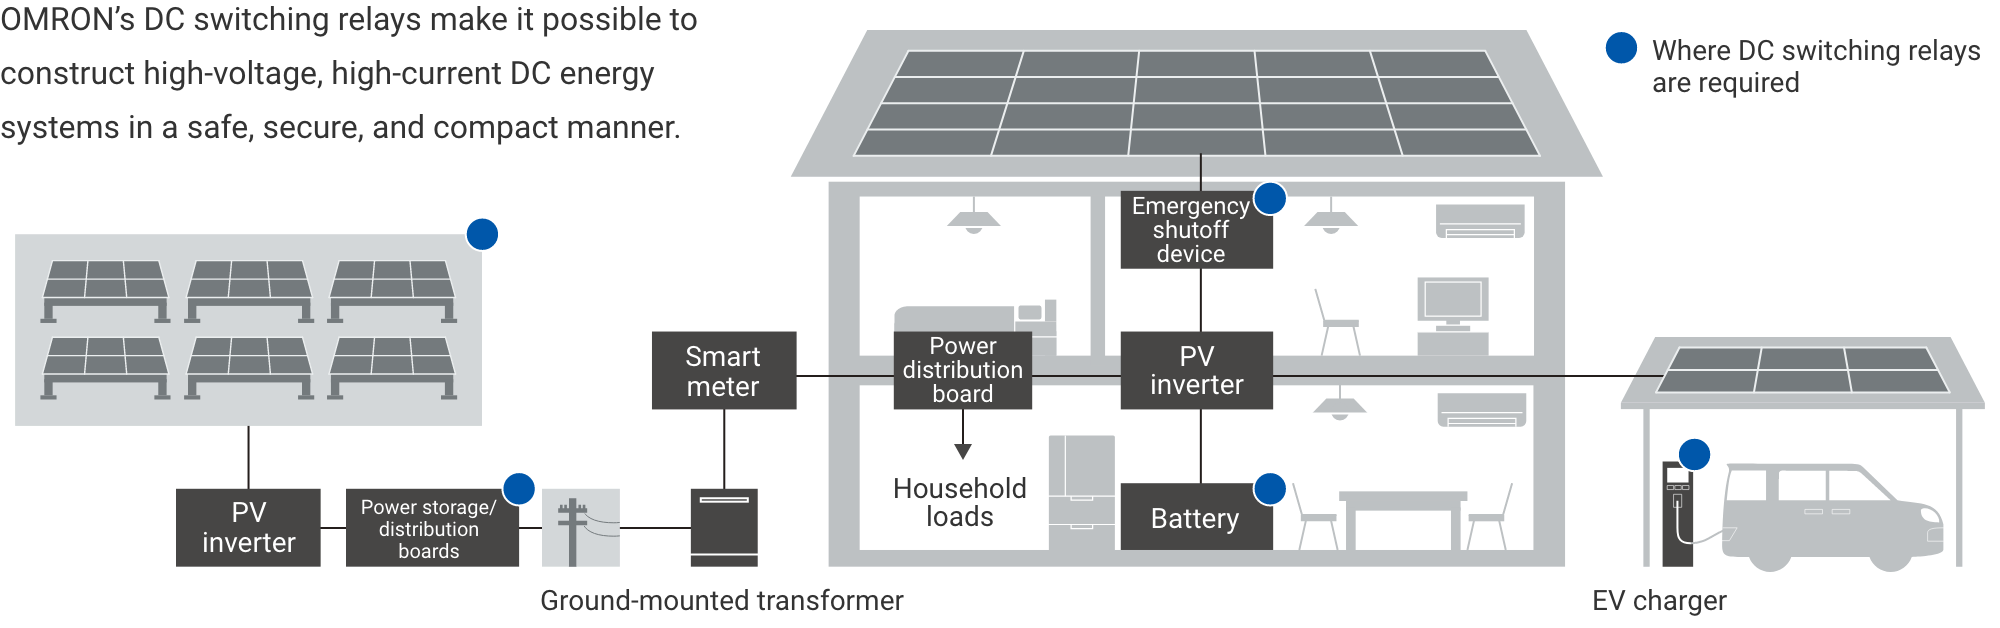 OMRON contributes to technologies that safely and securely store and use the high-voltage, high-current energy required to build systems. Where DC switching relays are required: Solar panel, Power storage/distribution boards, Emergency shutoff device, Battery, EV charger